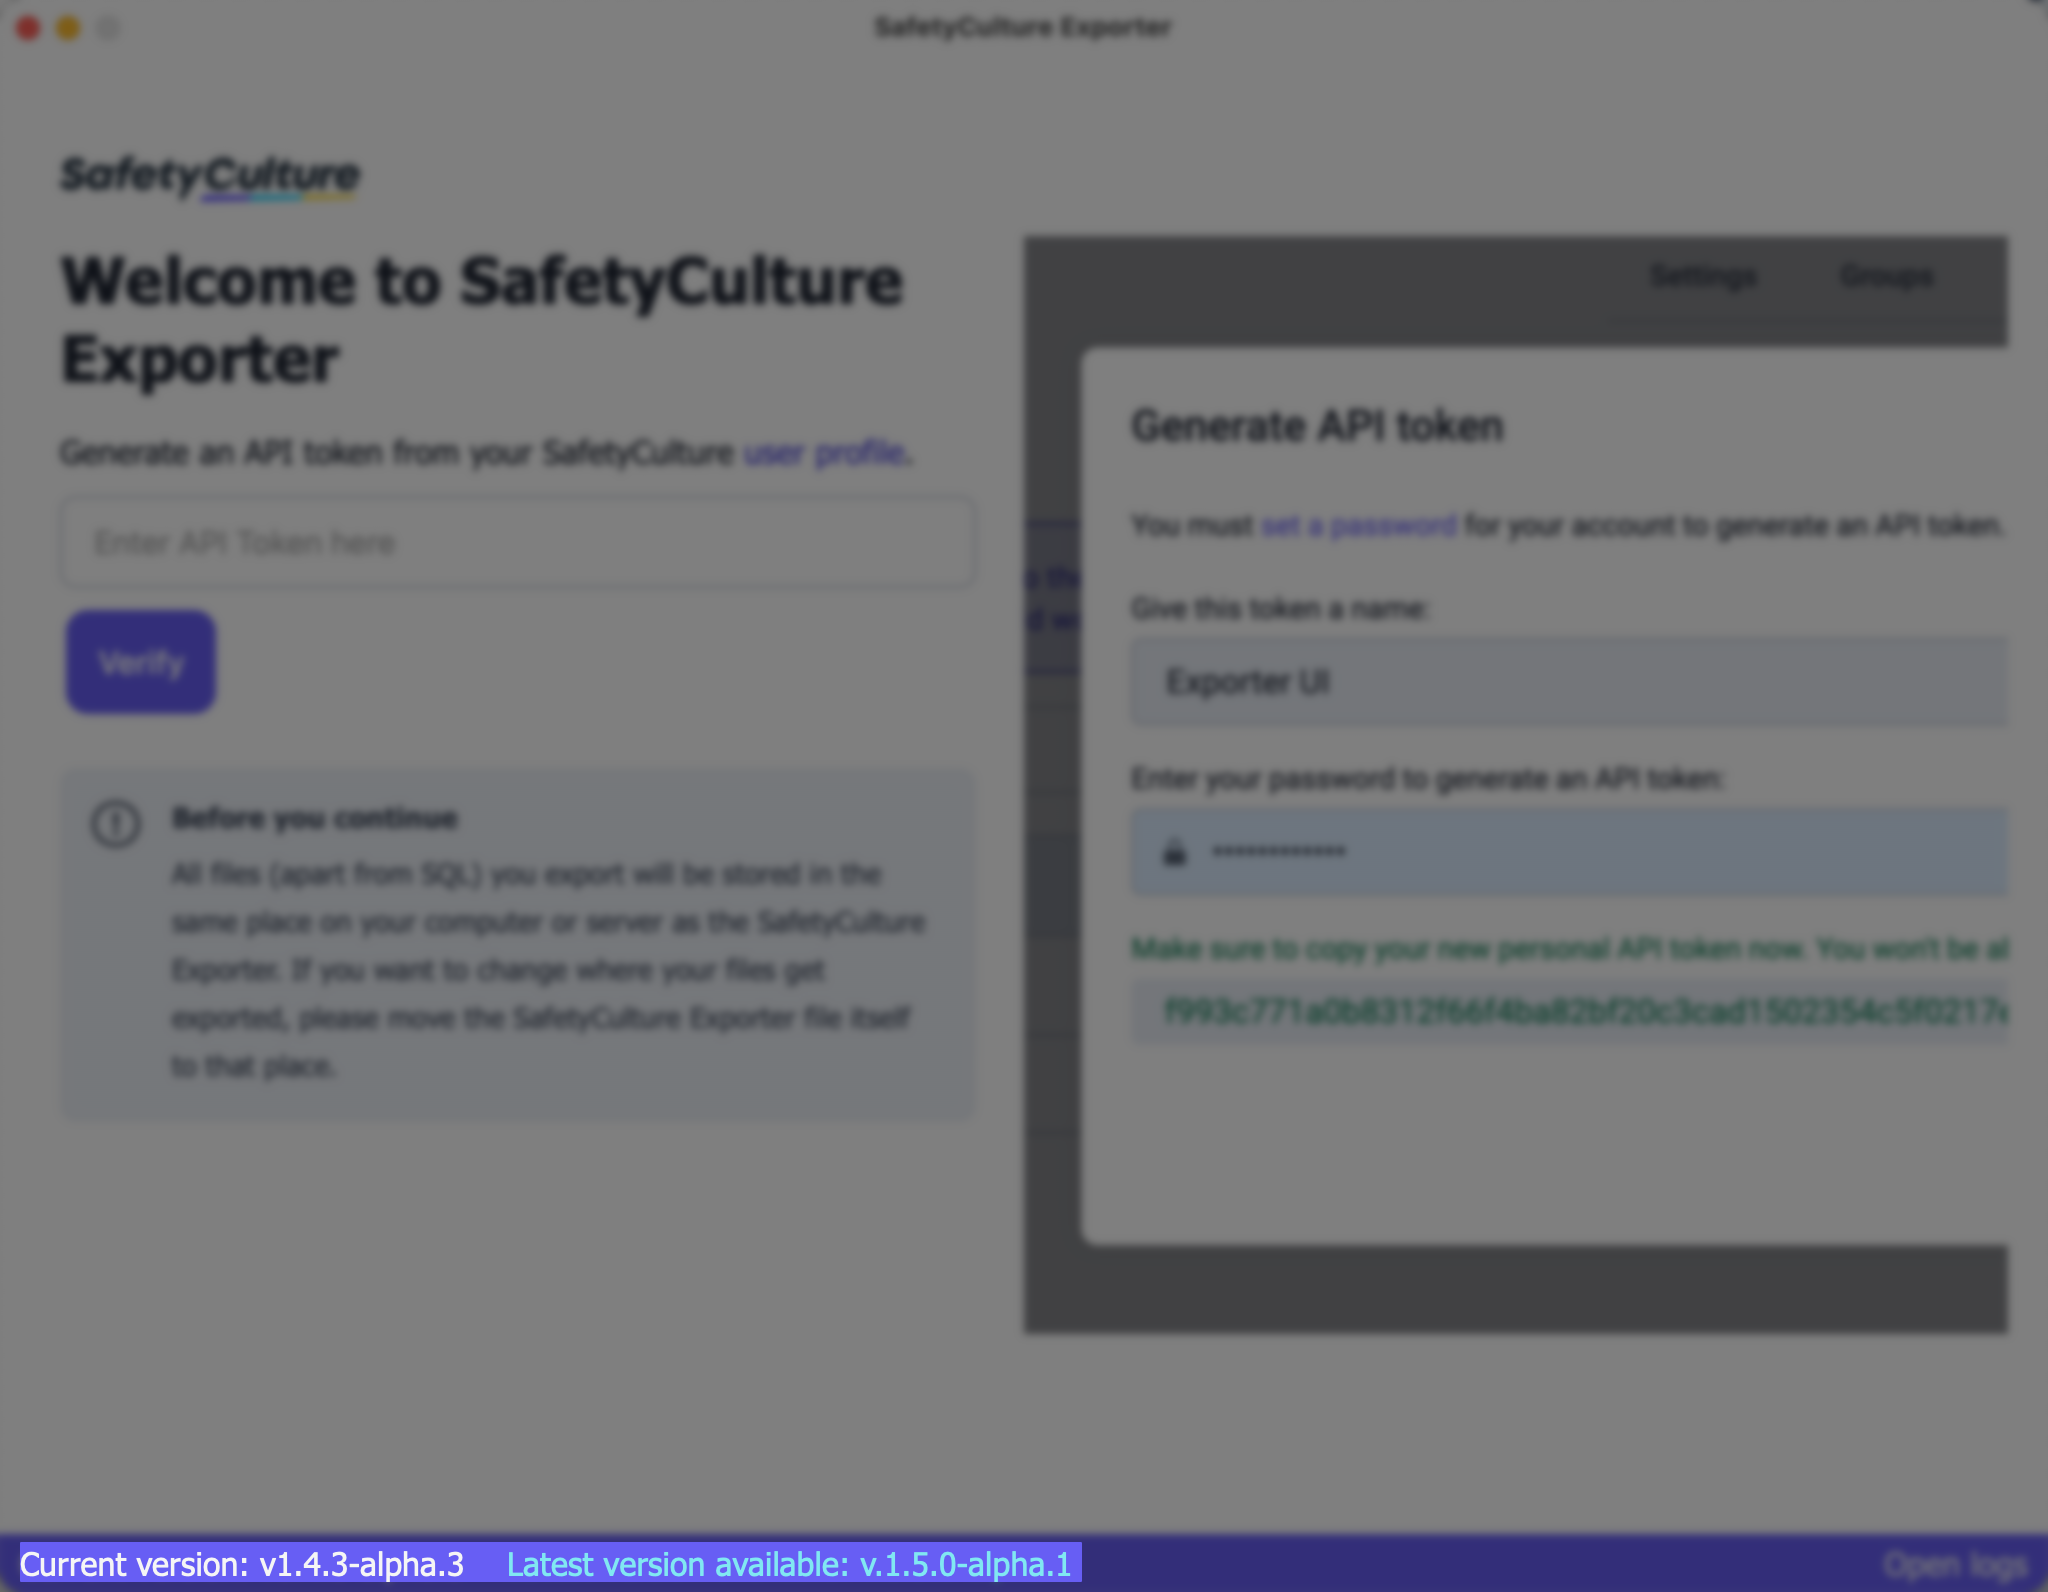 View the version of the SafetyCulture Exporter.